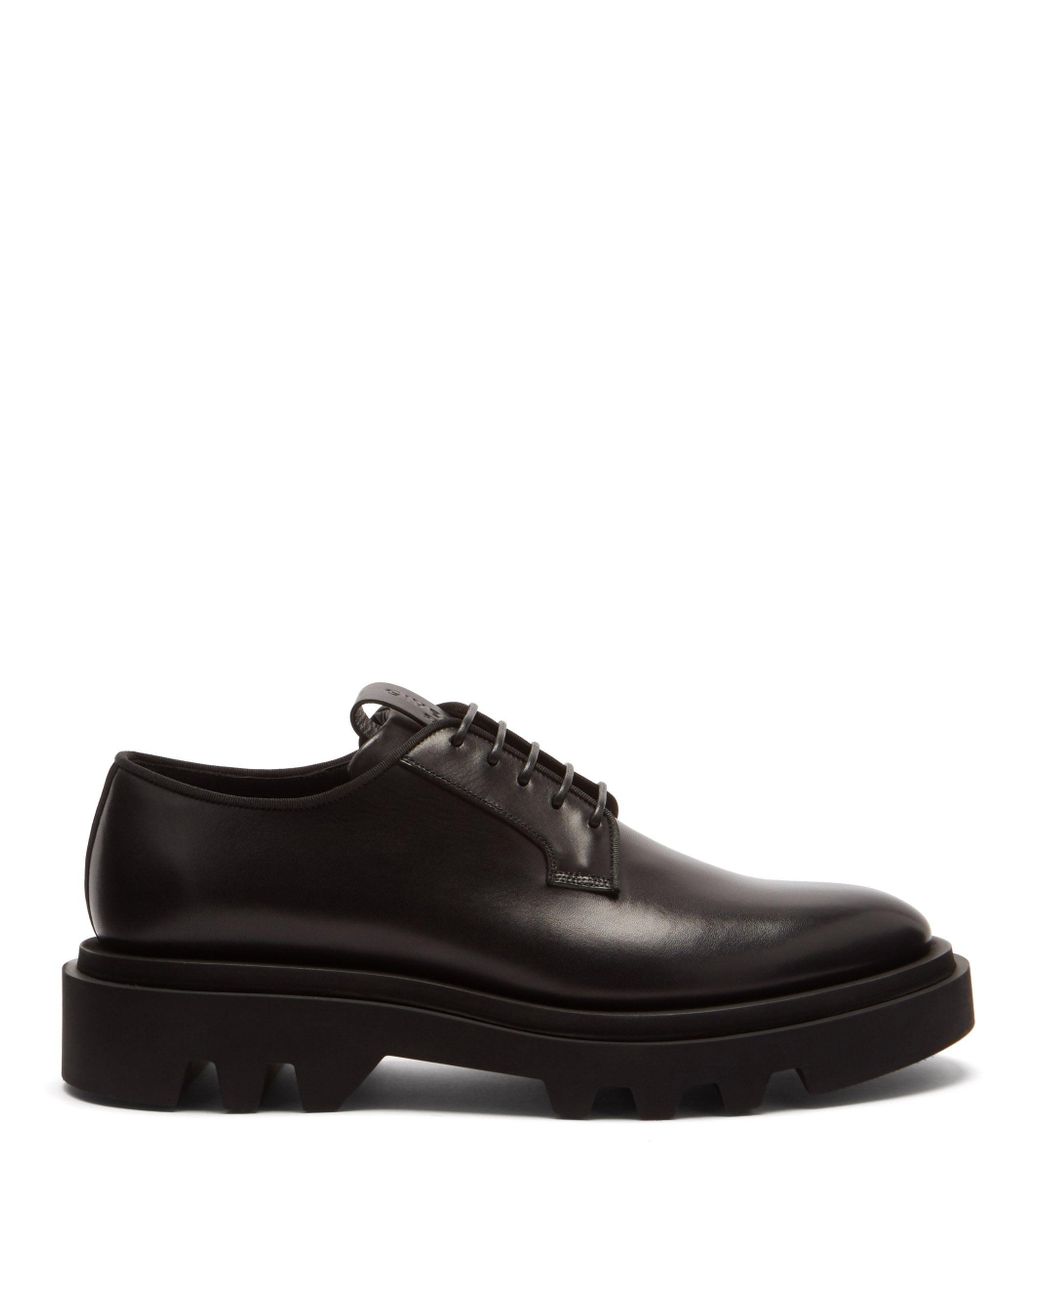 Givenchy Chunky-sole Leather Derby Shoes in Black for Men - Lyst